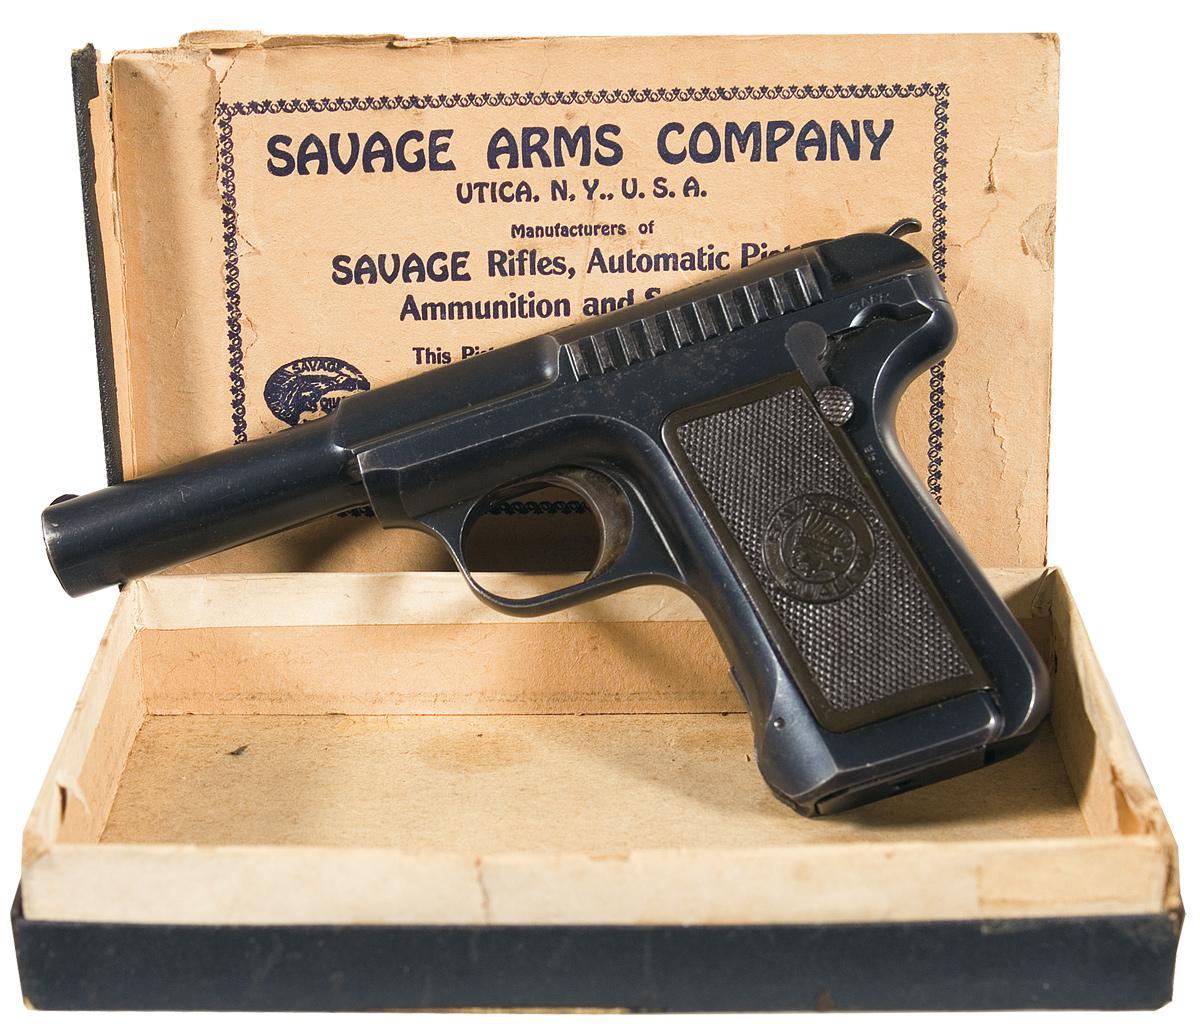 Savage Rifle Indian Logo - Outstanding Savage Arms Corporation Model 1917 Semi Automatic